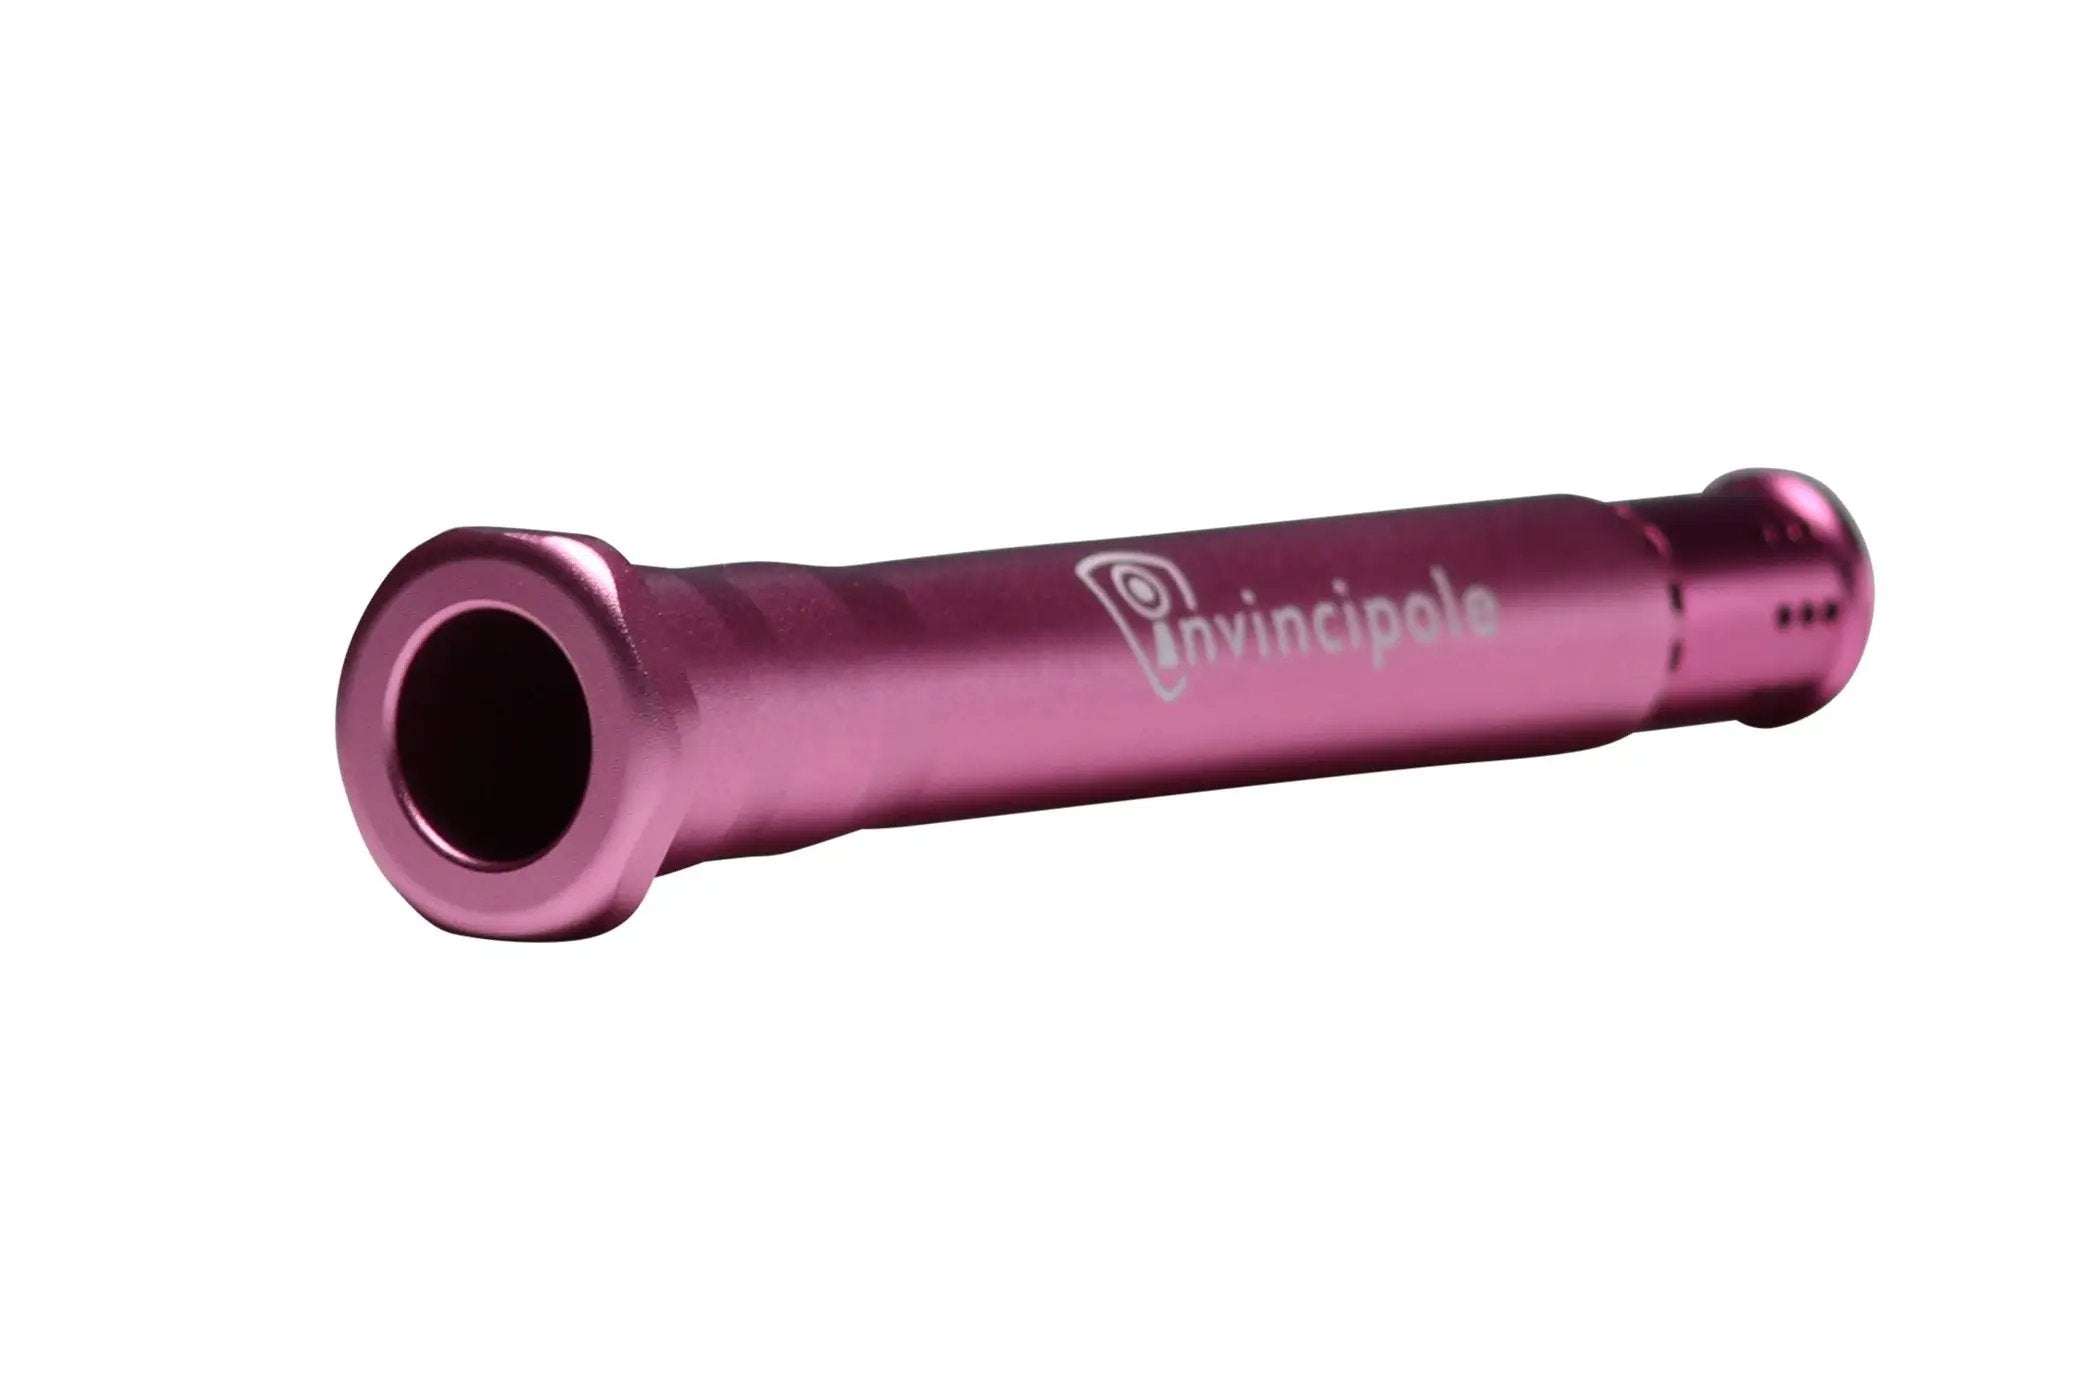 Invincibowl - GERANIUM INVINCIPOLE INFINITY- PINK 18MM/14MM DOWNSTEM by Chill Steel Pipes